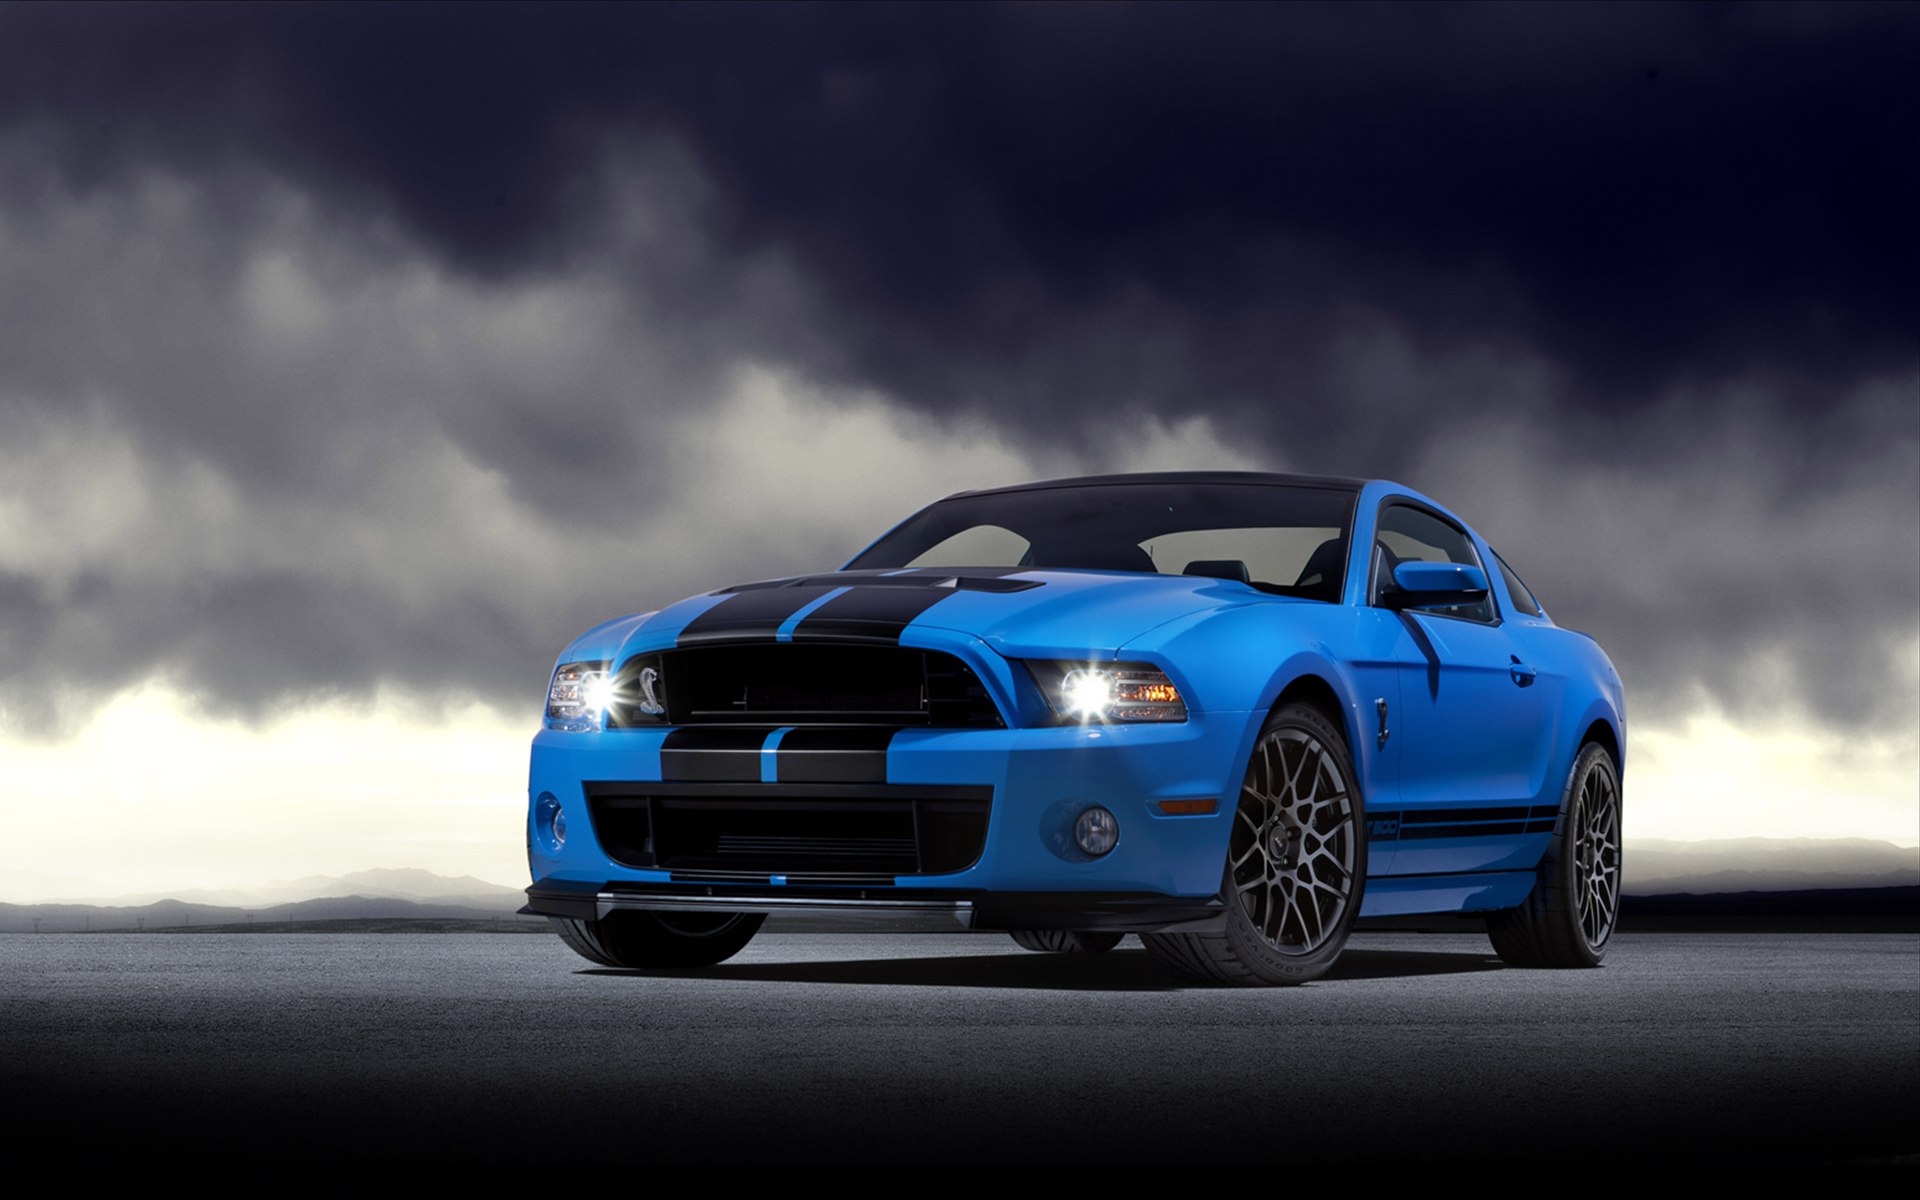  Ford Shelby GT500 Wallpaper HD Car Wallpapers